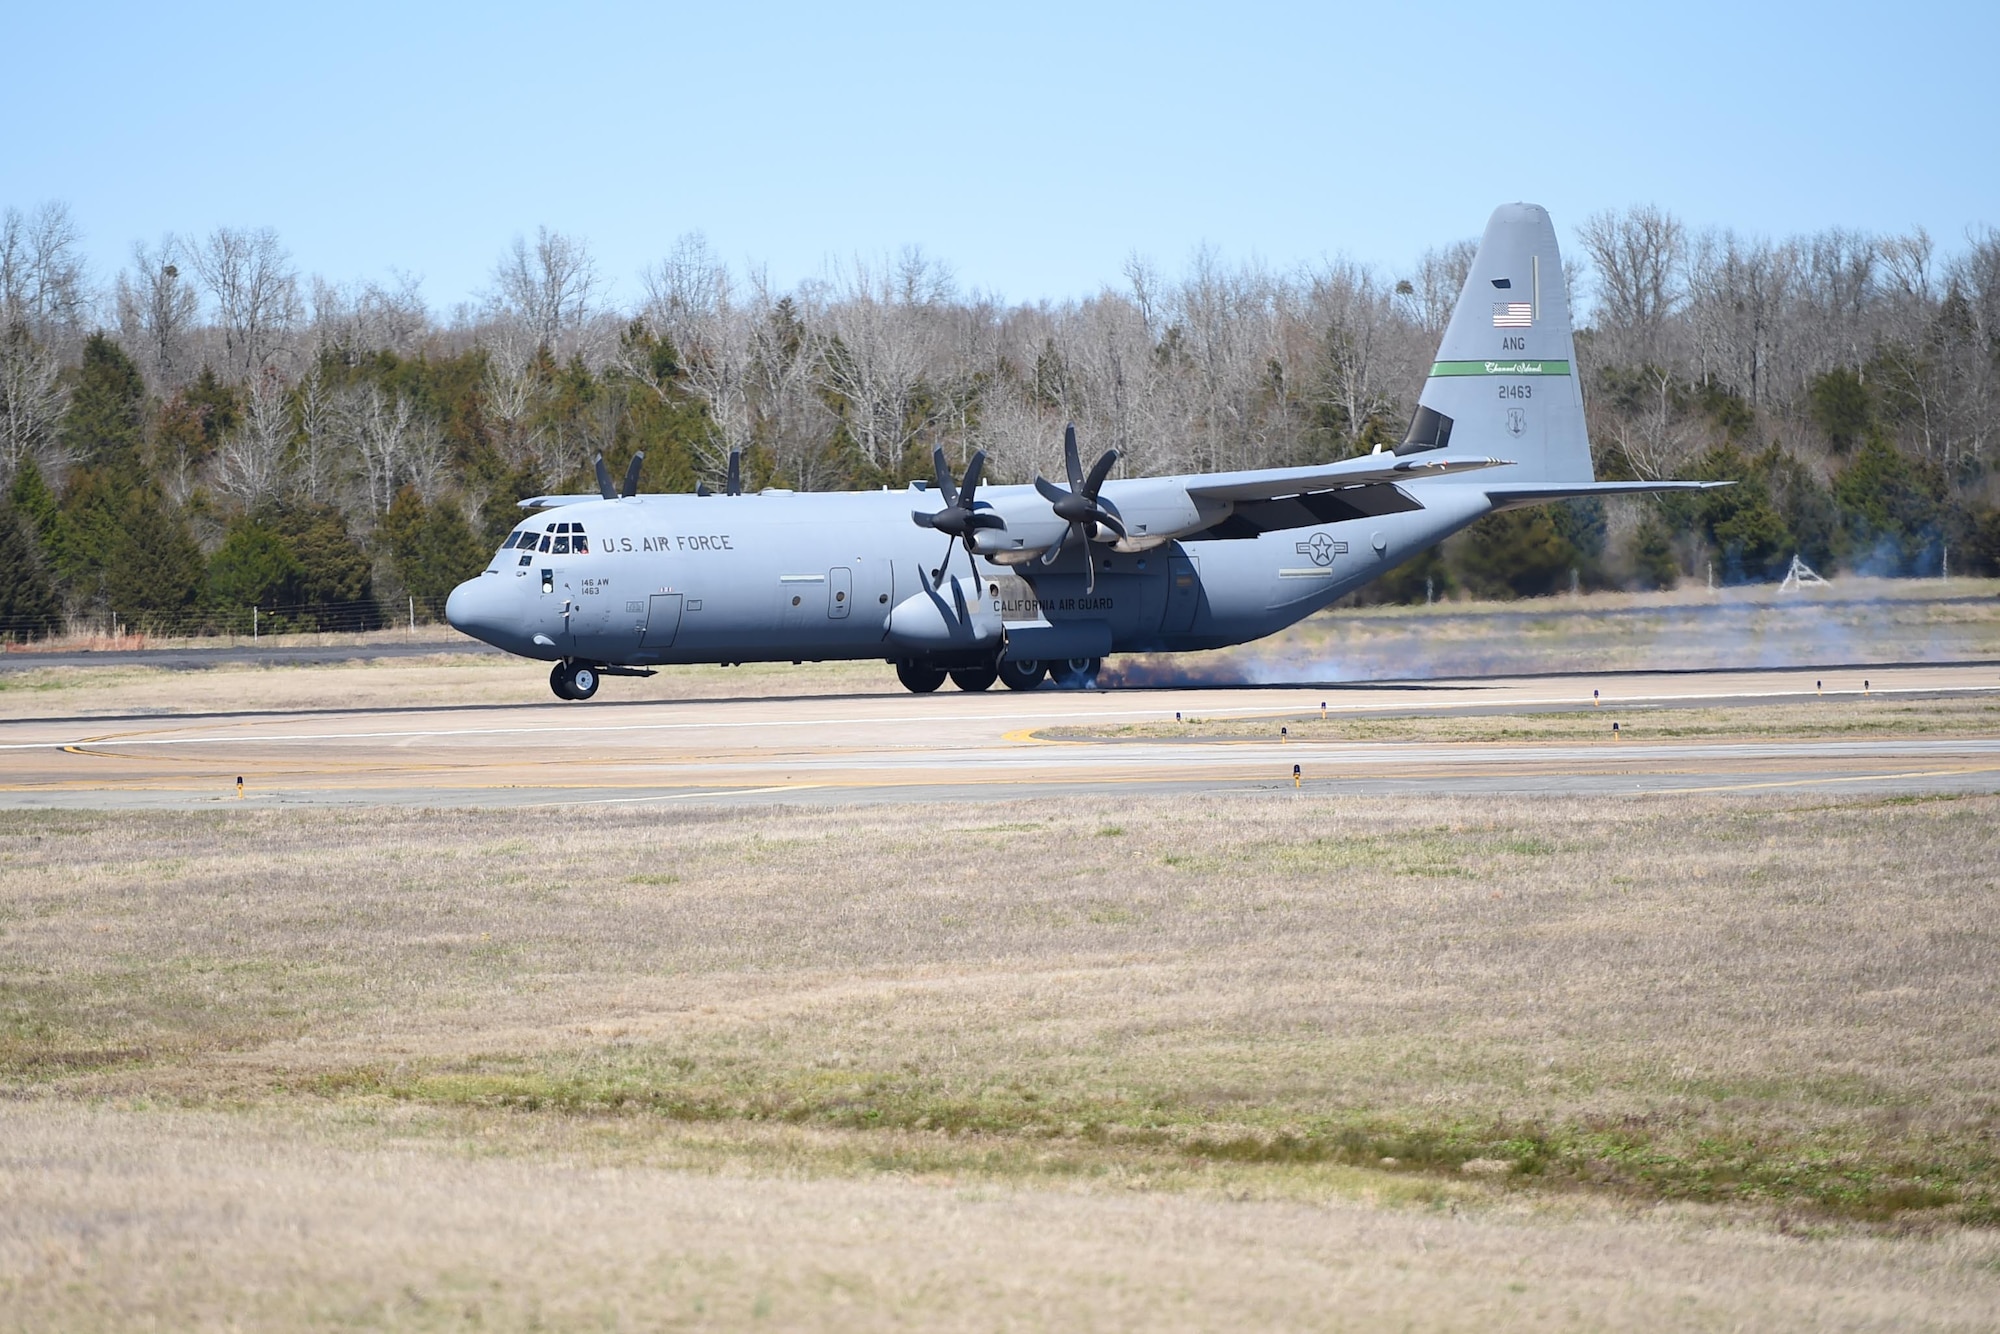 A C-130J is taxiing on a runway.